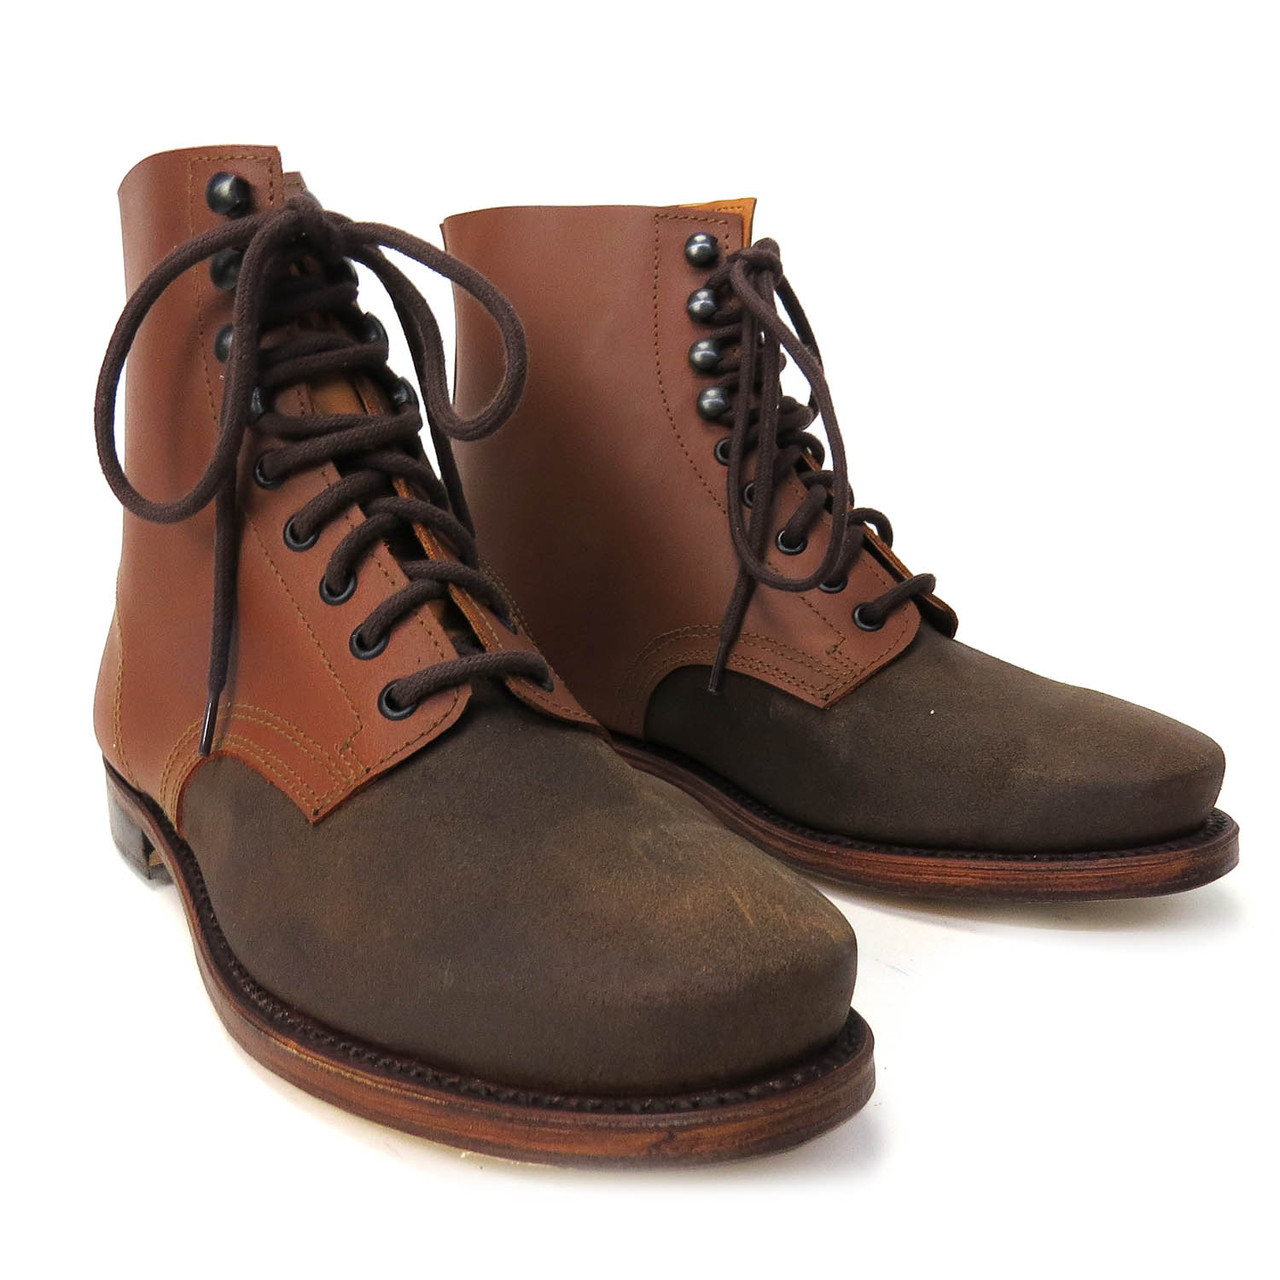 M37 Low Boots with Hobnails with Heavy Duty Soles